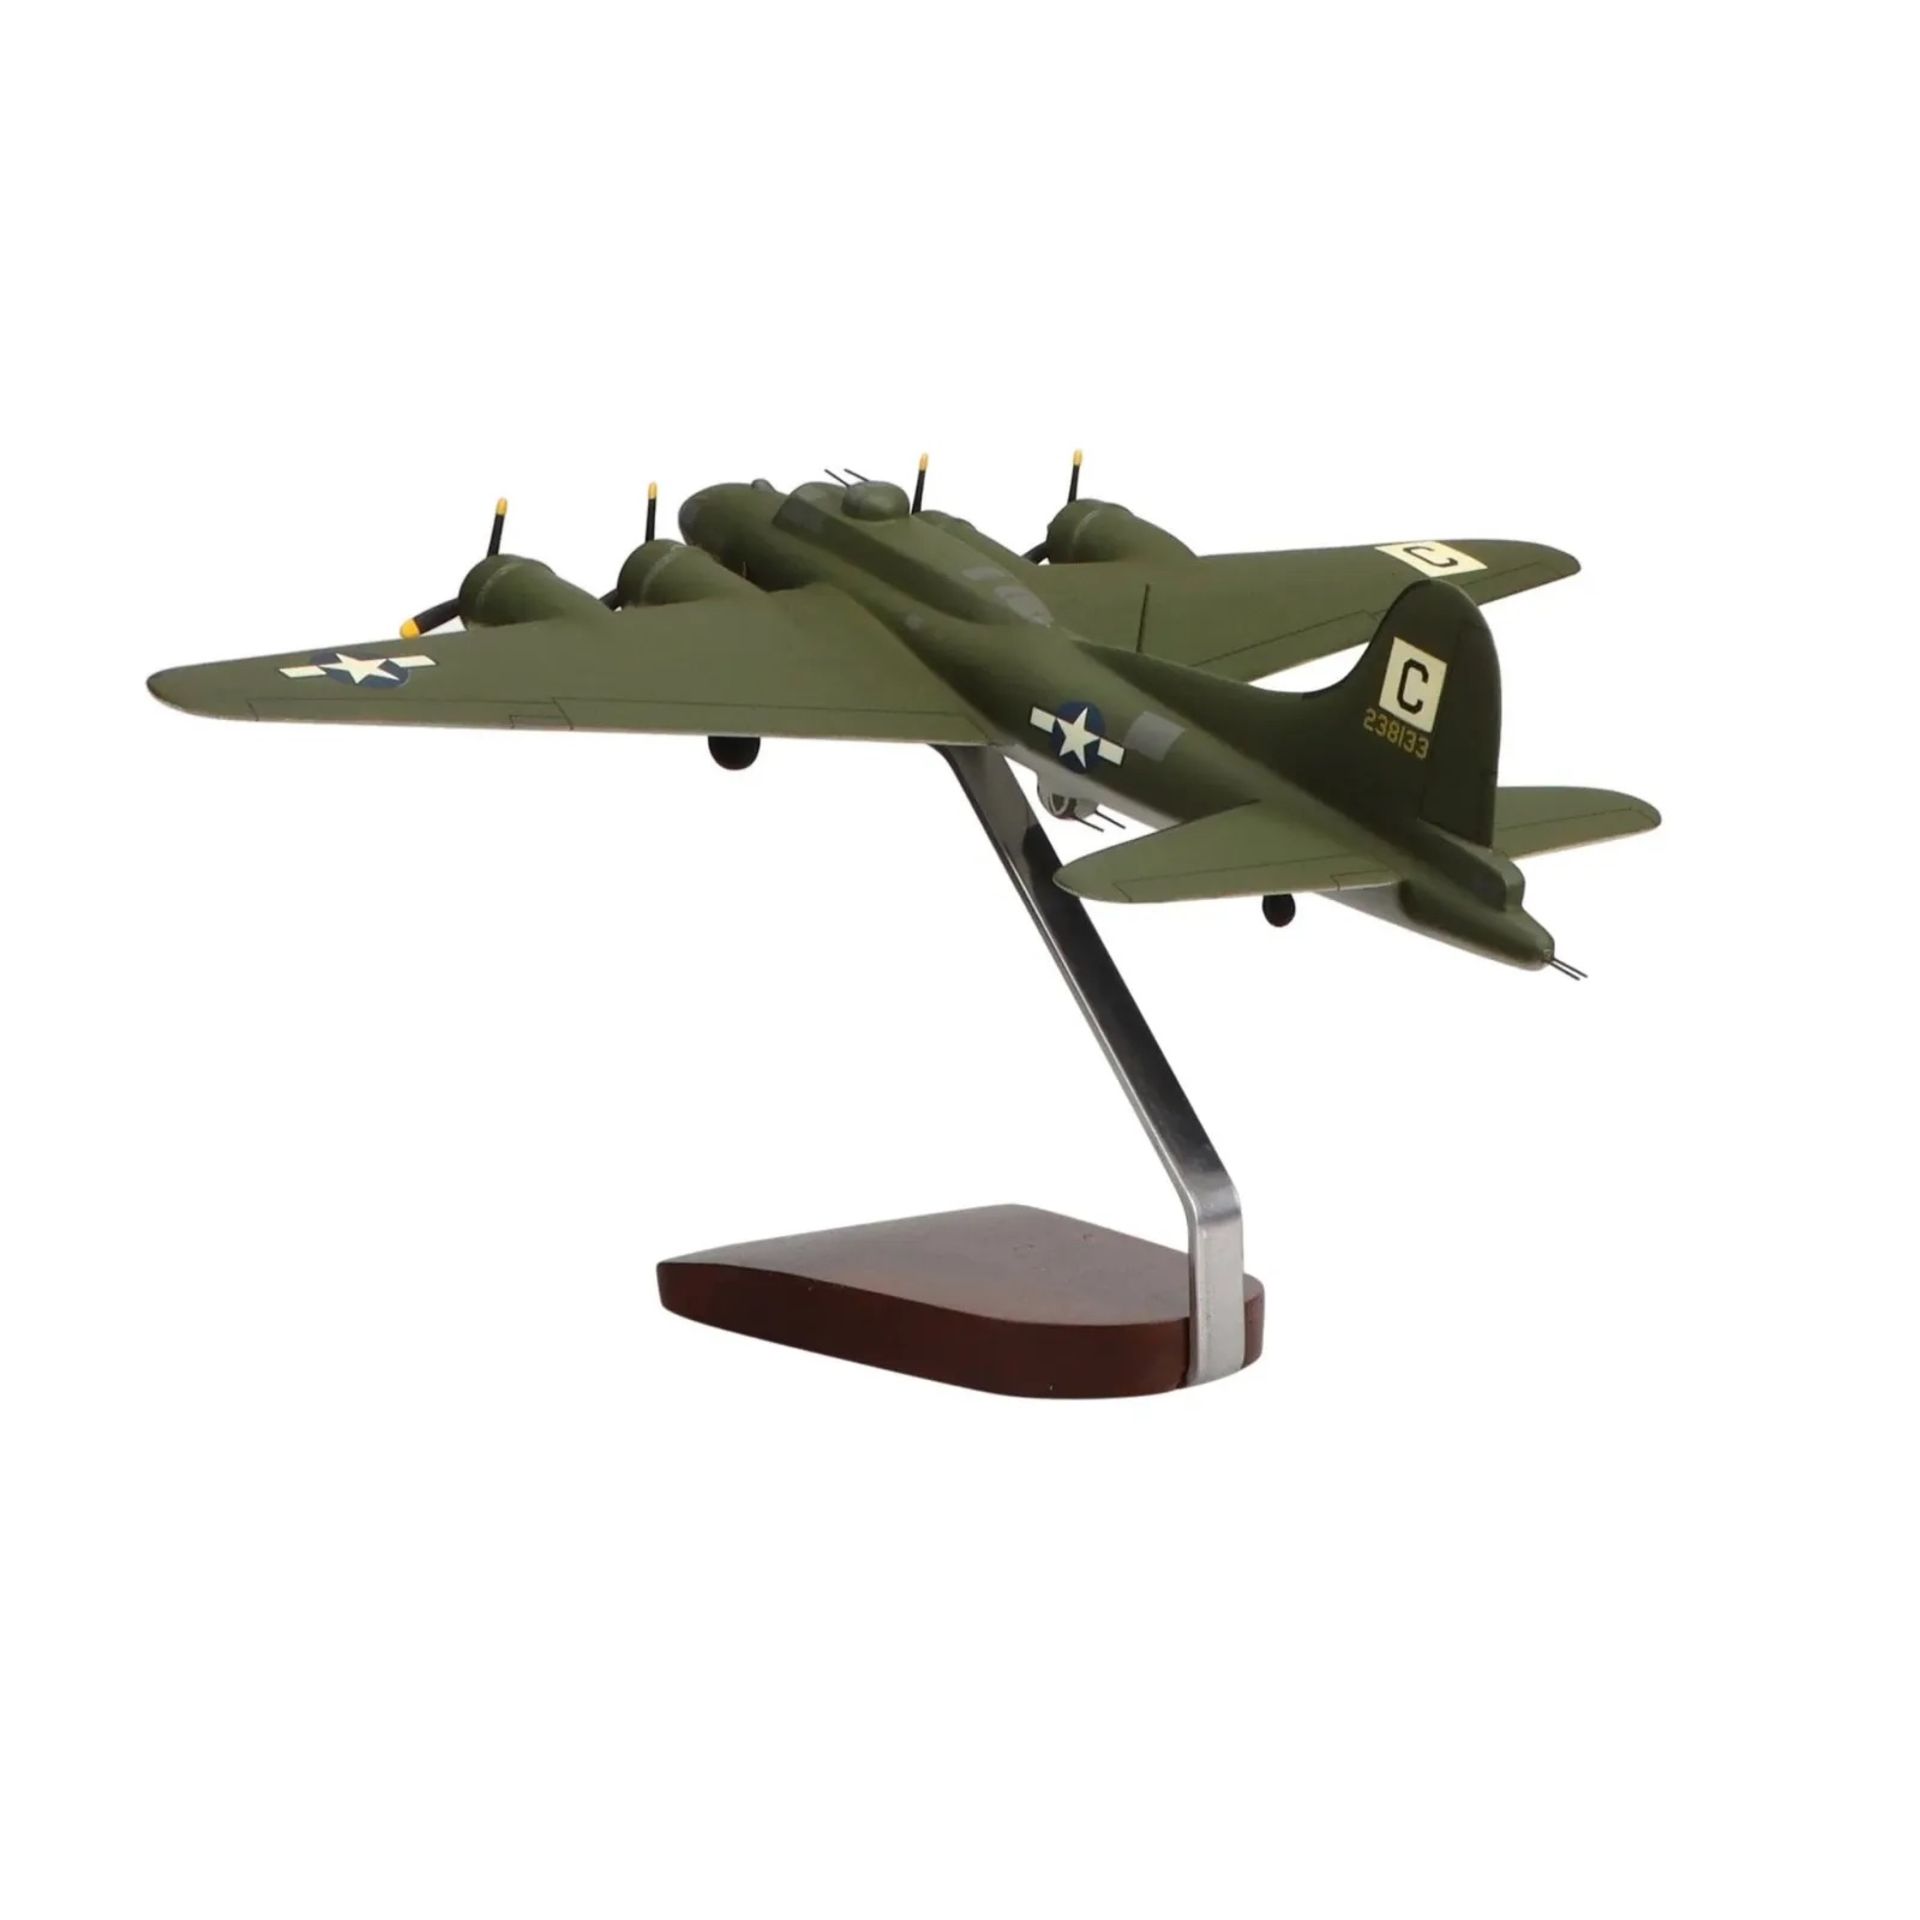 Boeing B17 Flying Fortress Scale Model - Image 2 of 4